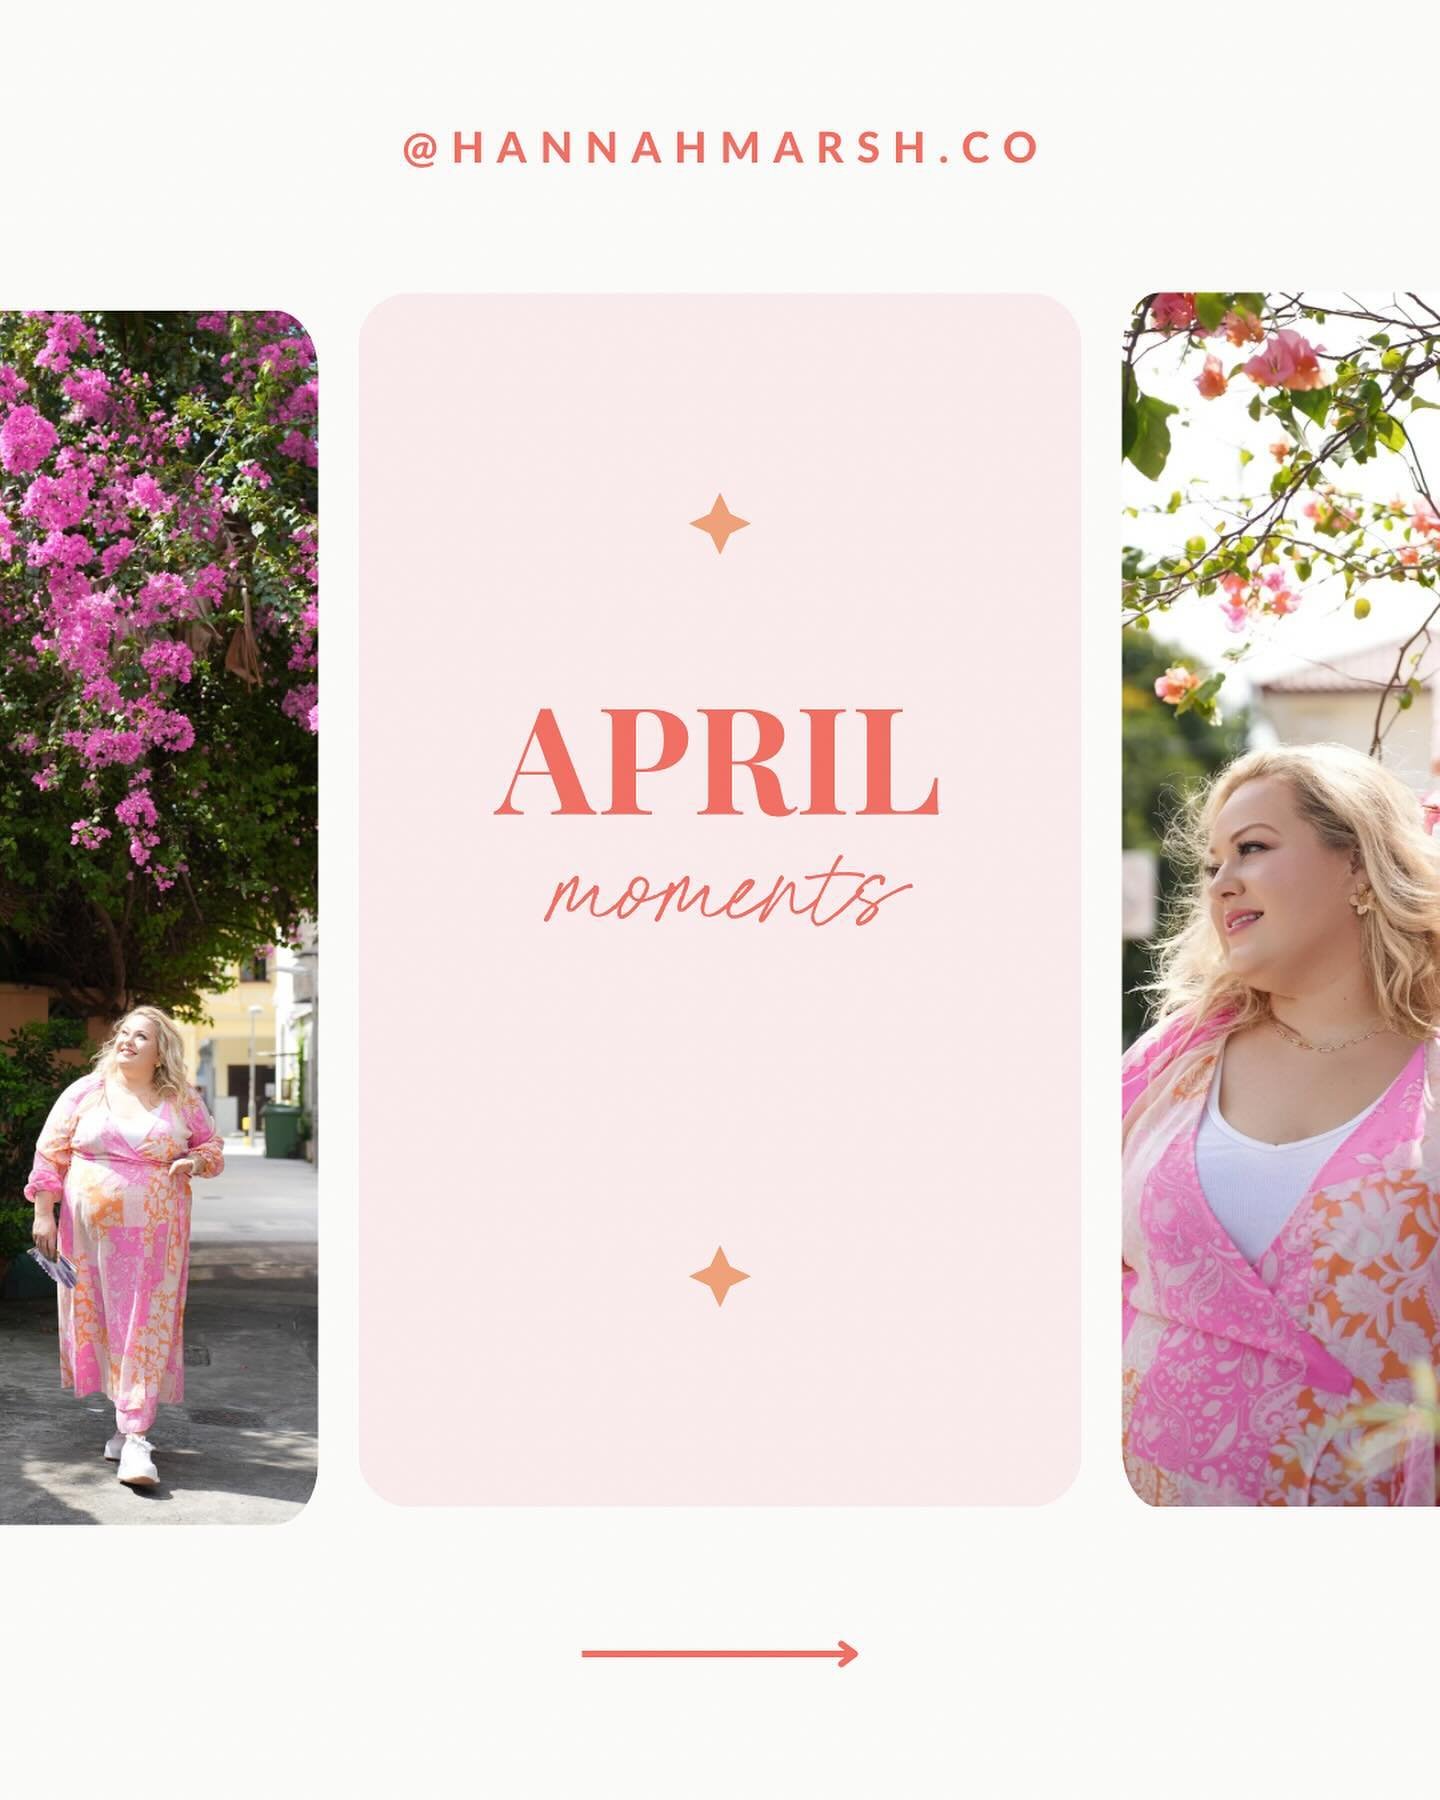 April, you were a whirlwind of beauty and adventure. From blooming flowers🌼 to blooming ideas 💭, this month included many sweet memories. Here&rsquo;s to May, bringing more adventures and opportunities to blossom! 🌸✨ #MonthlyRecap #NewBeginnings